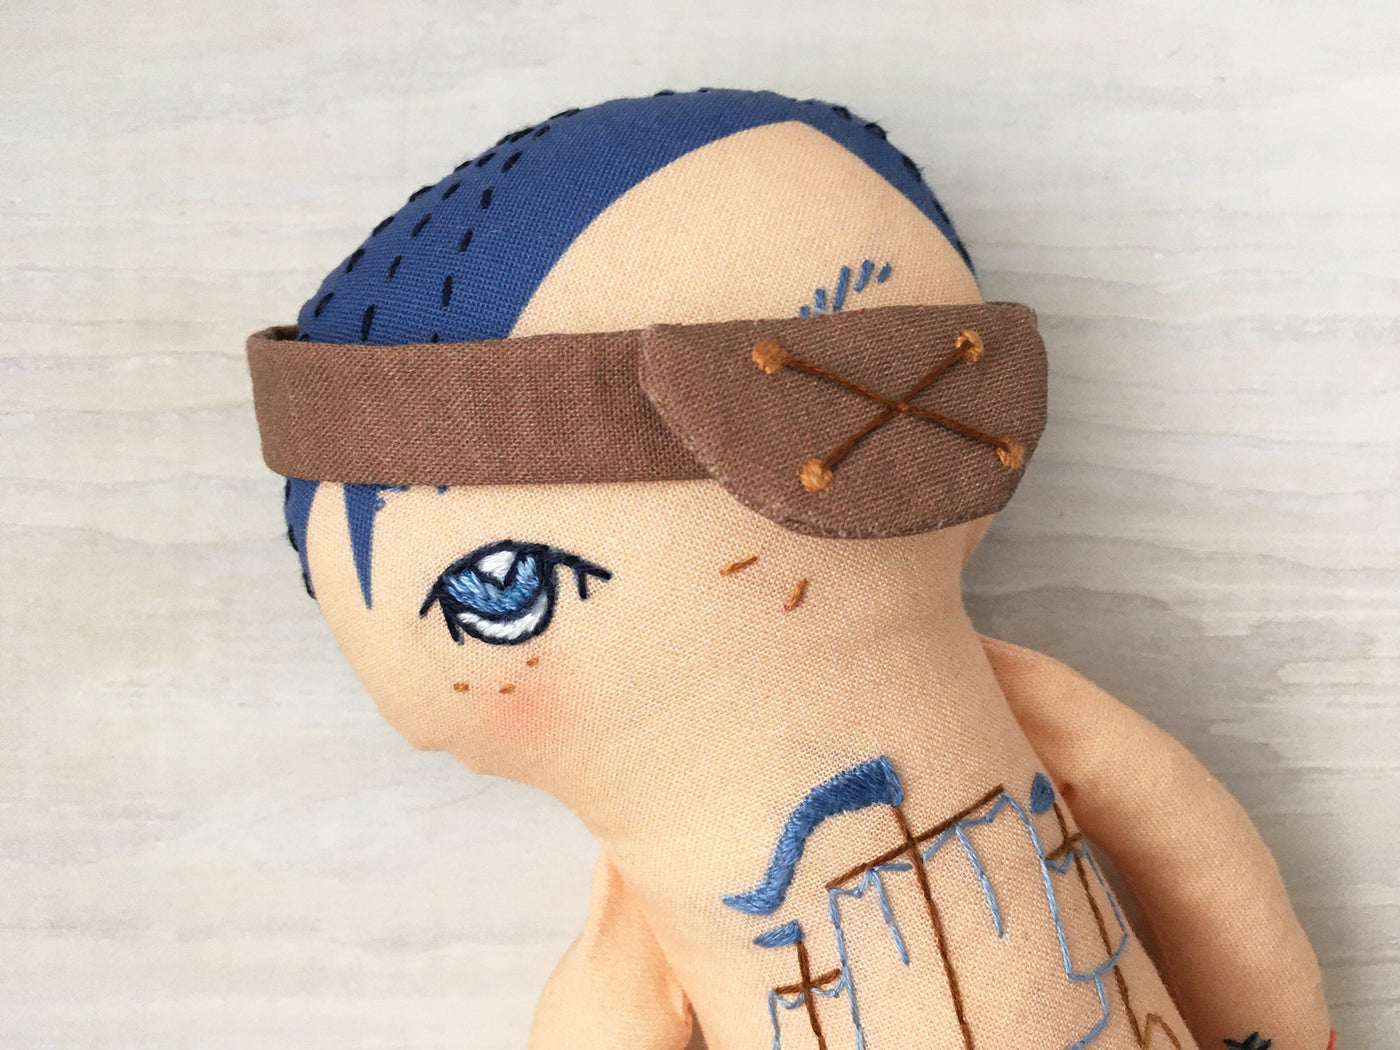 DIY Cut and Sew Pirate boy doll with embroidery, cloth doll pattern